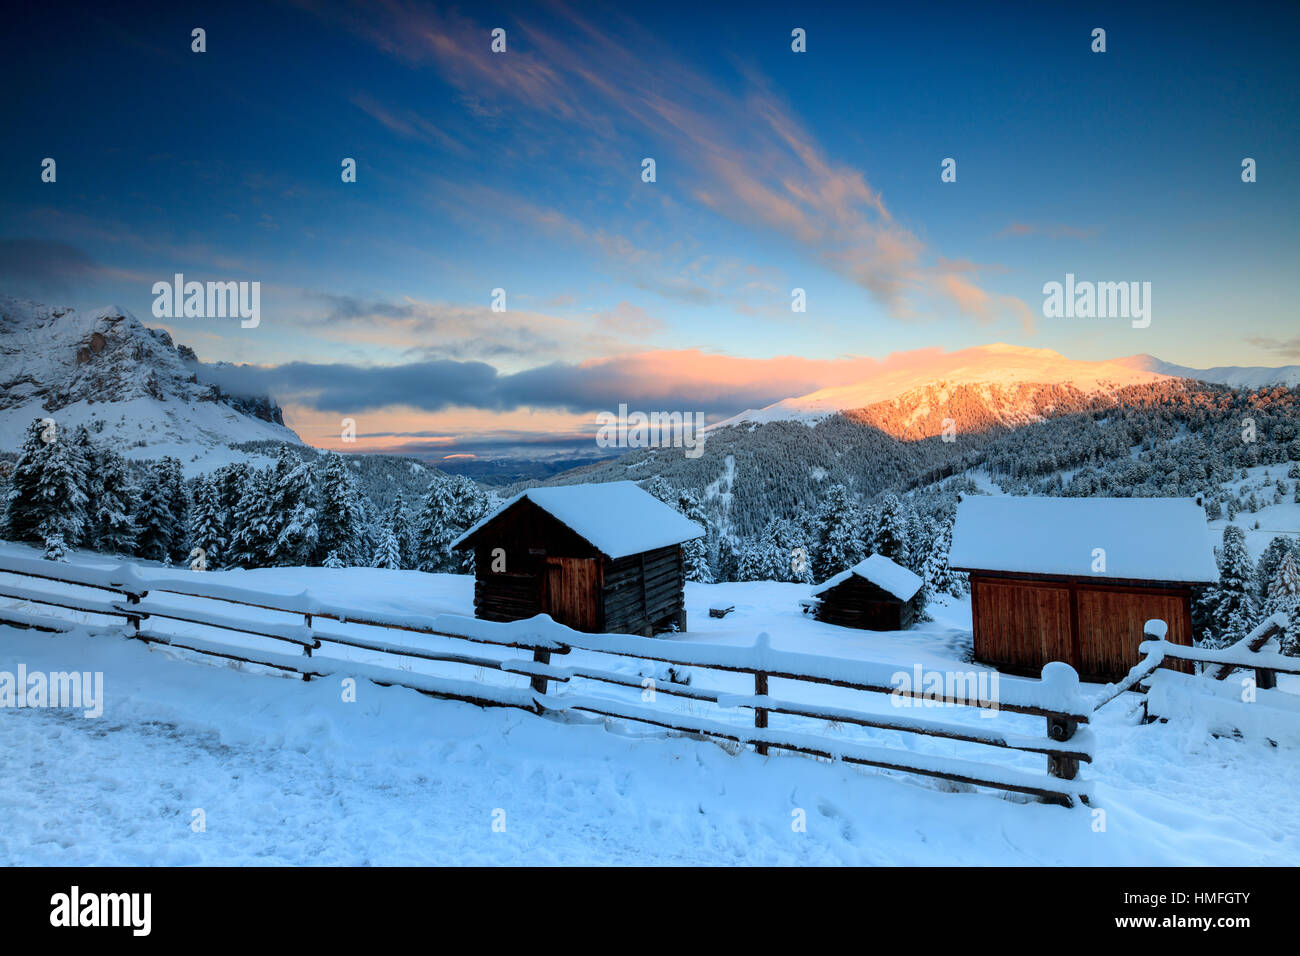 The sunrise lights up the snowy woods and huts, Passo Delle Erbe, Funes Valley, South Tyrol, Italy Stock Photo